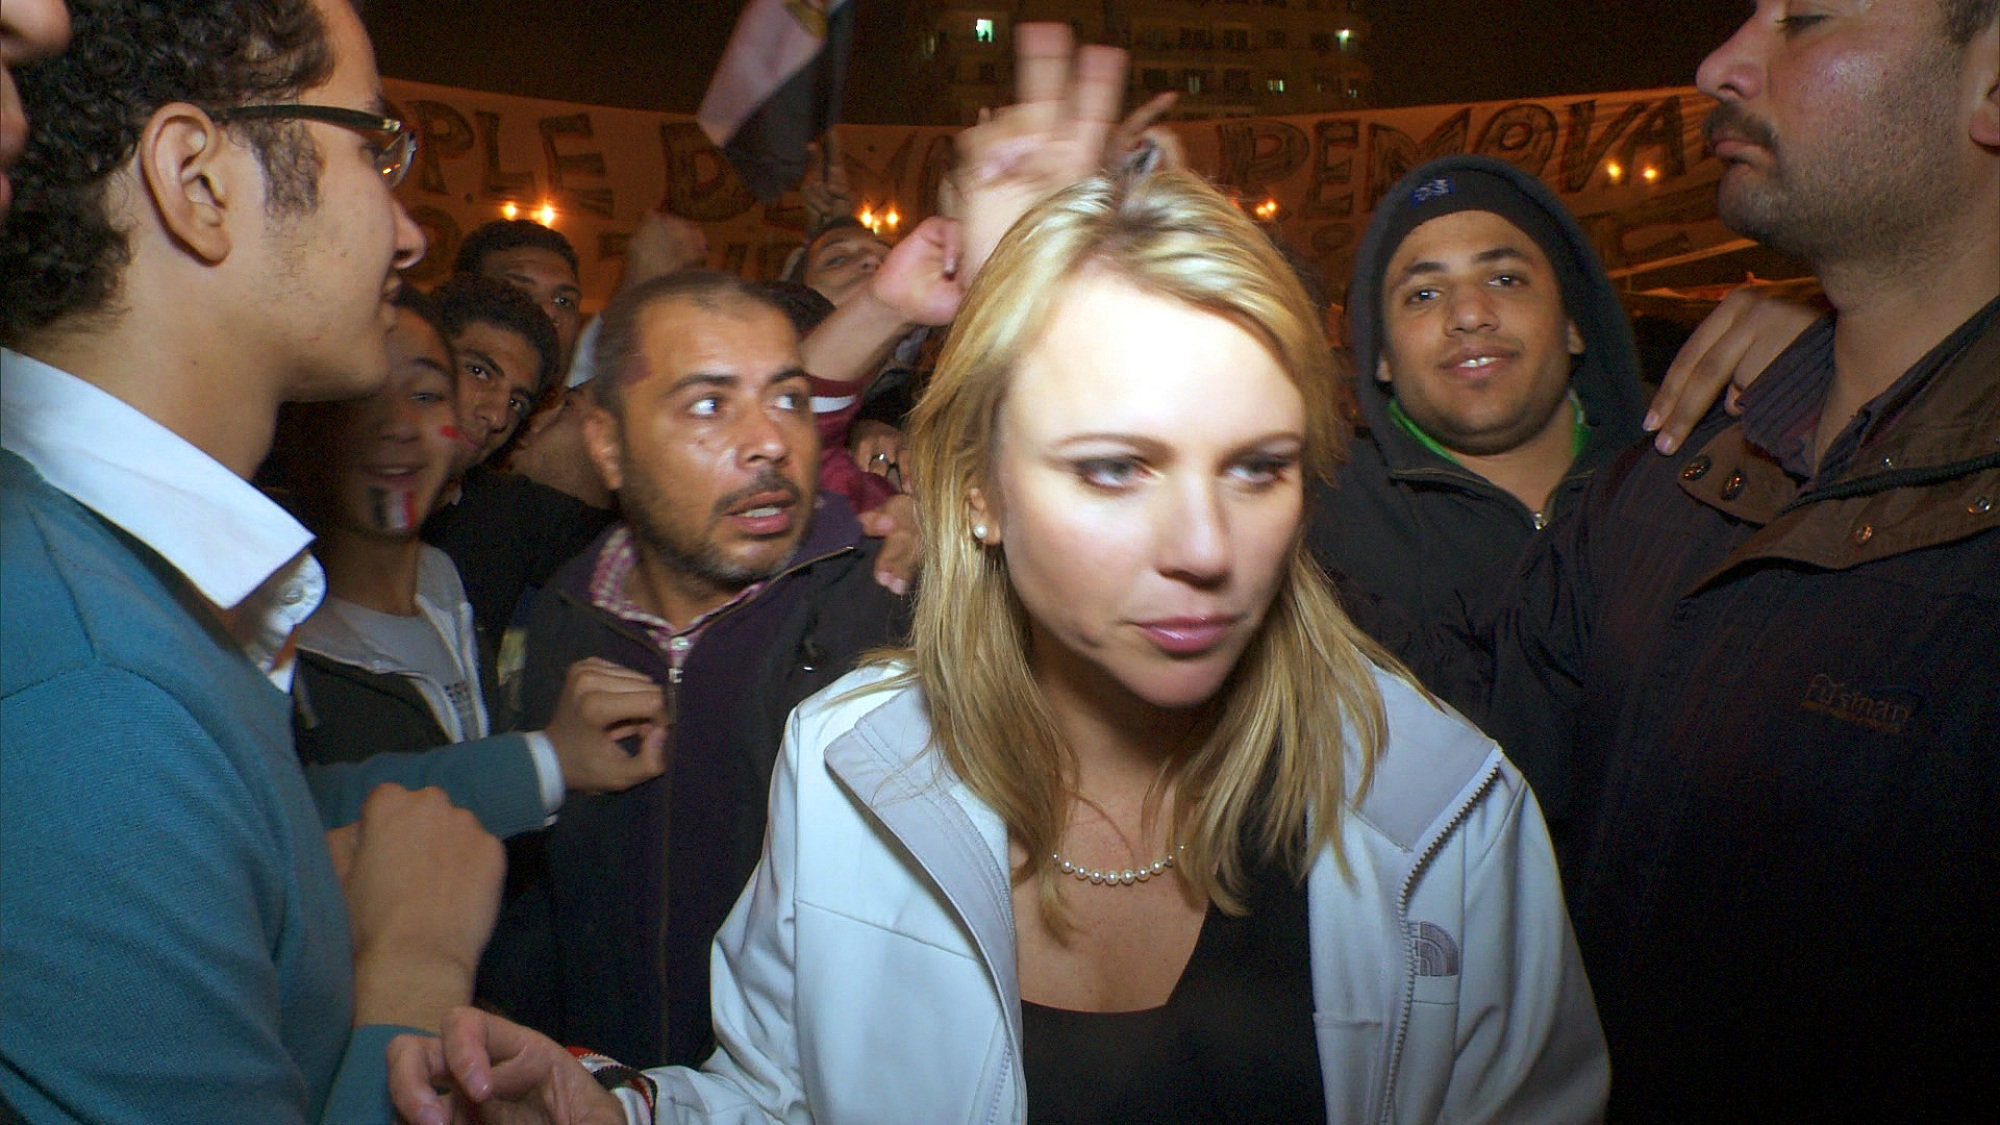 CBS Correspondent Lara Logan covers the jubilation in A-Tahrir Square for a '60 Minutes' story shortly before she was surrounded by a mob of more than 200 people, separating her from her crew and been objected to a brutal and sustained sexual assault, downtown Cairo, February 11, 2011.